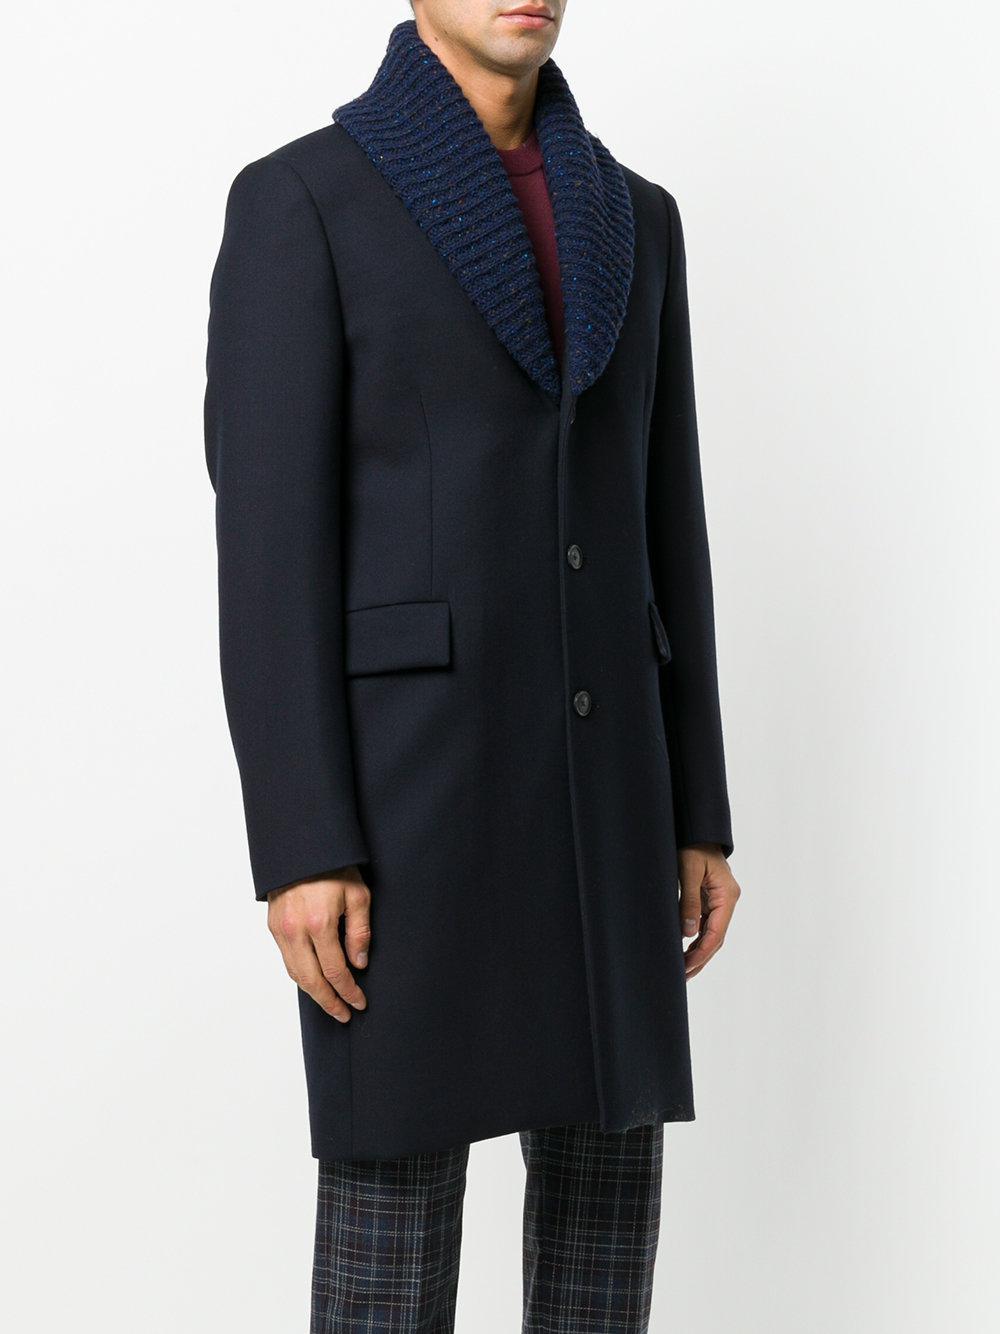 Lyst - Paul Smith Gents Shawl Collar Coat in Blue for Men